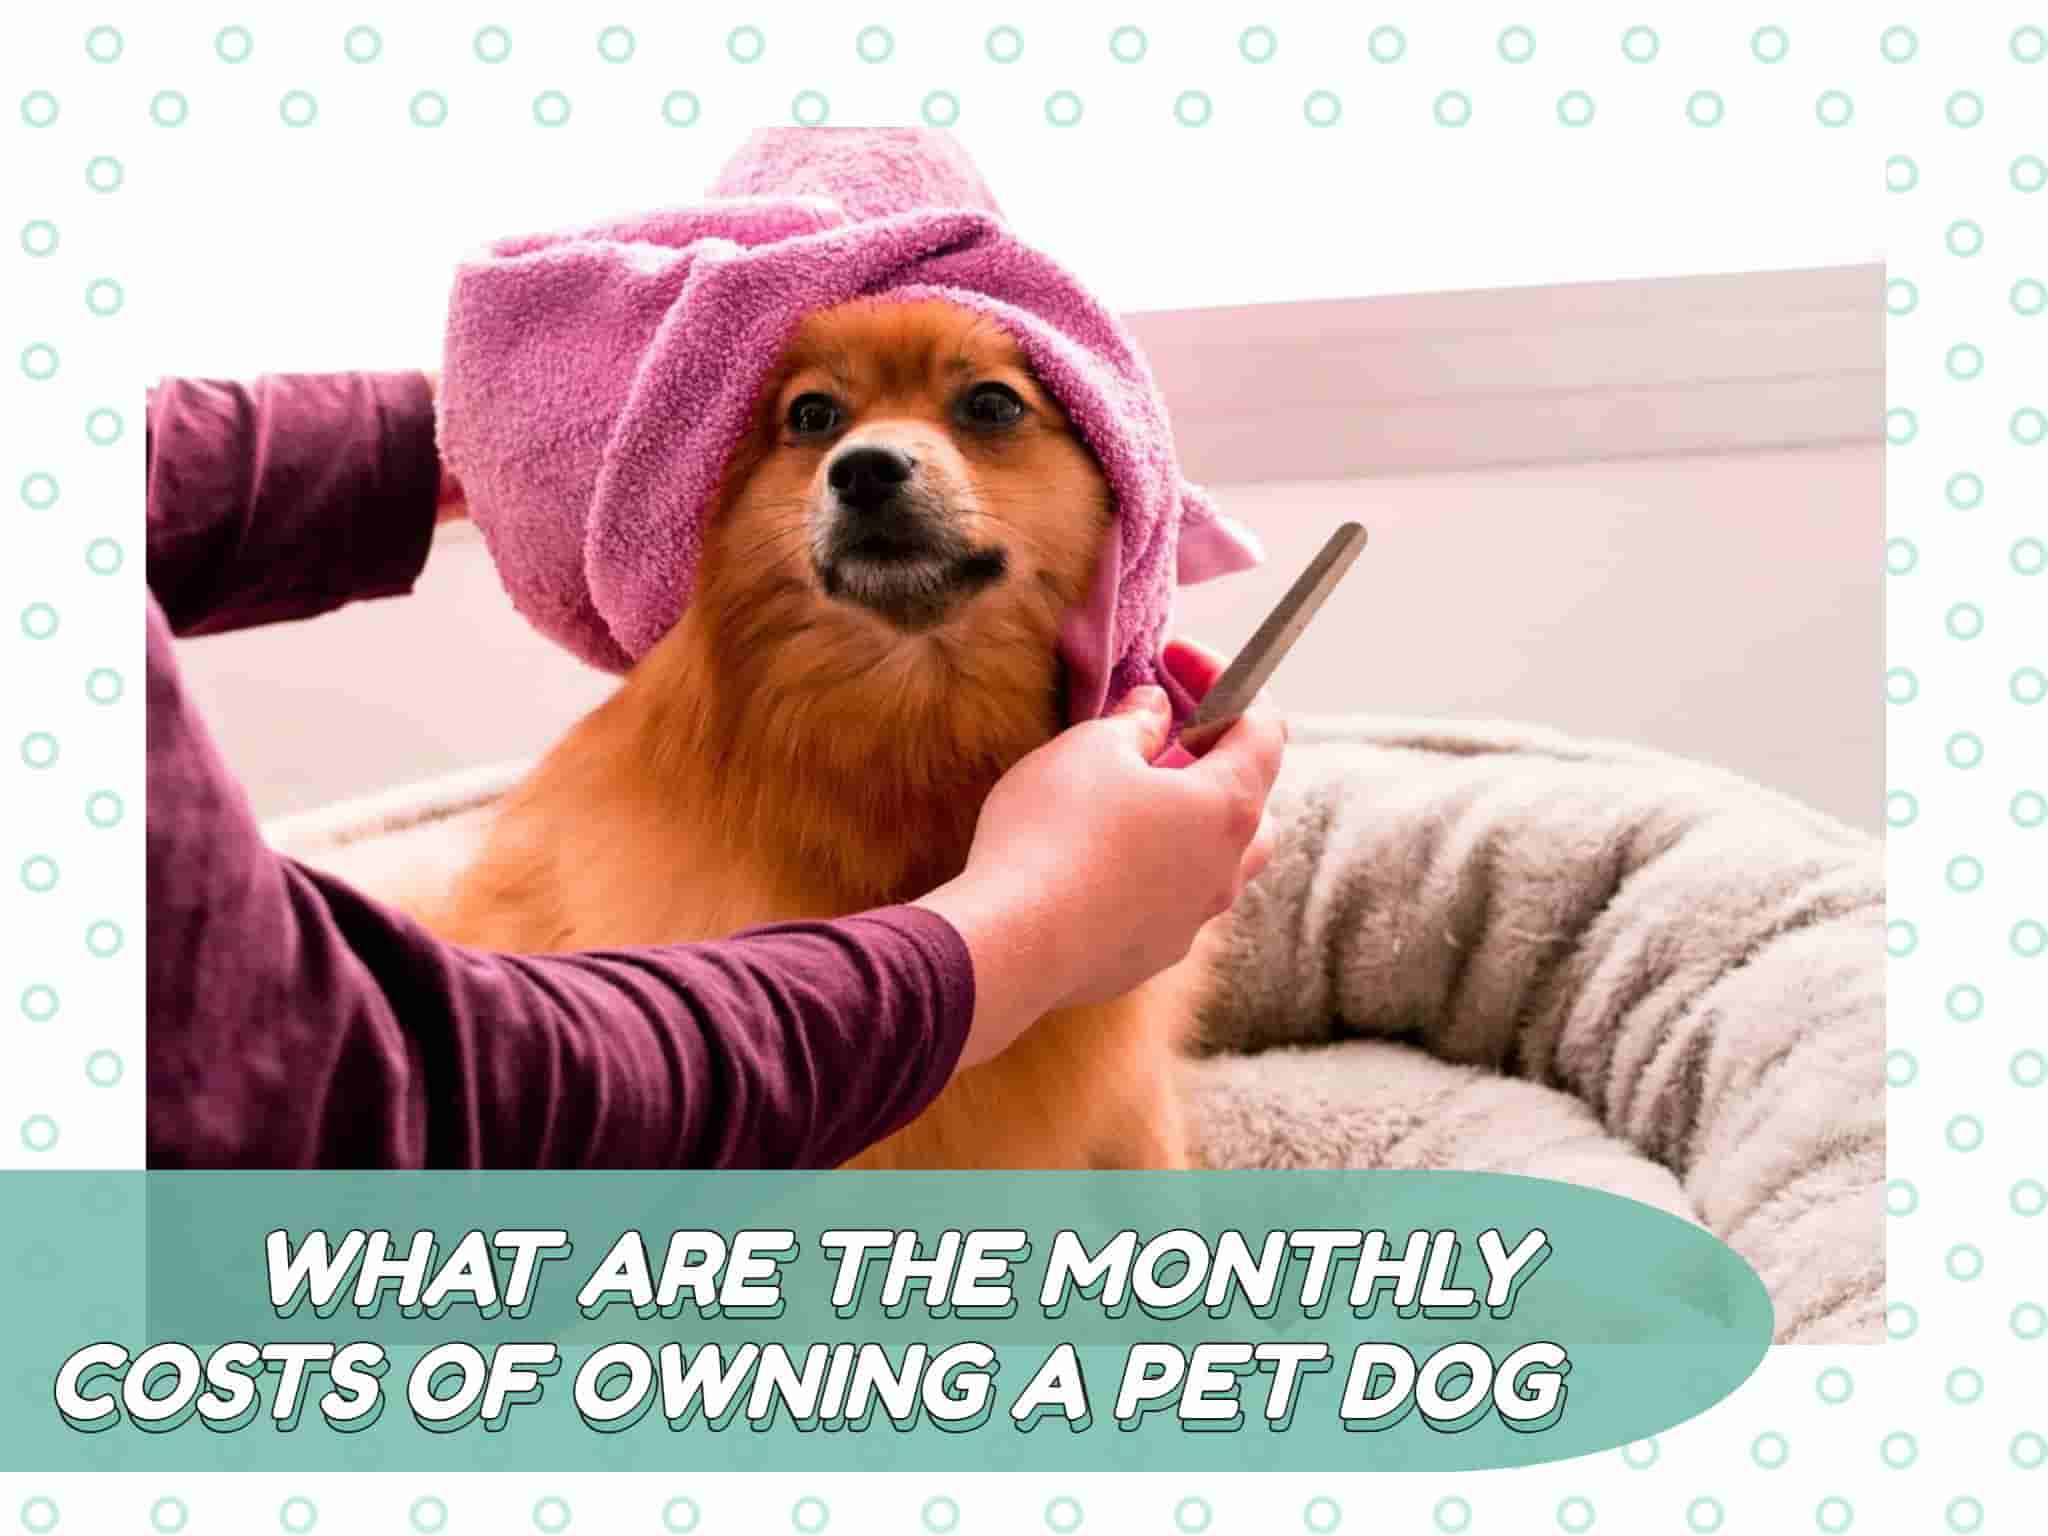 What are the Monthly Costs of Owning a Pet Dog, average cost of owning a dog per month, how much does a dog cost per month, how much does a dog cost per year, true cost of owning a dog, average cost of owning a dog per month, average cost of dog food per month, how much do dogs cost per year,